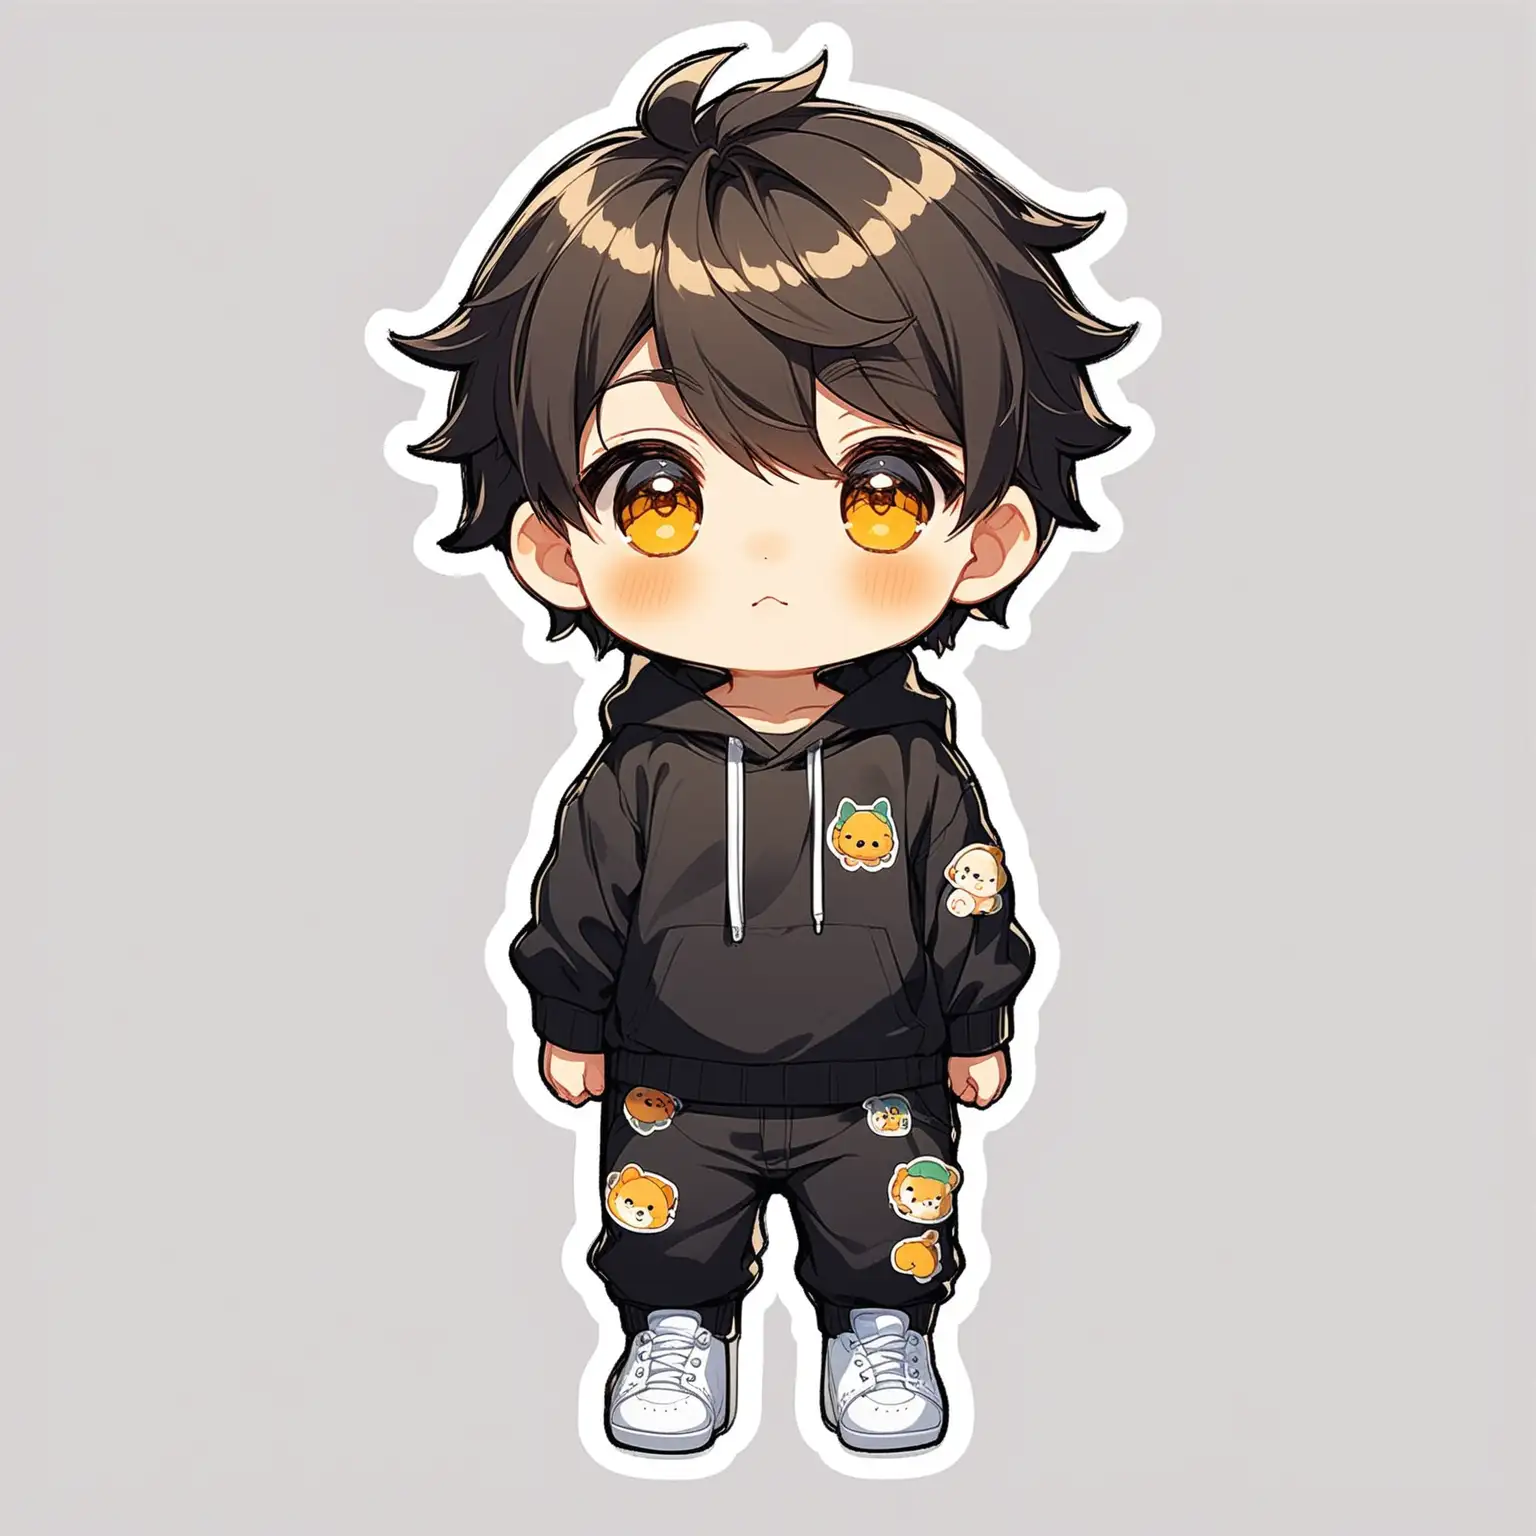 Adorable Full Body Sticker of a Boy on White Background